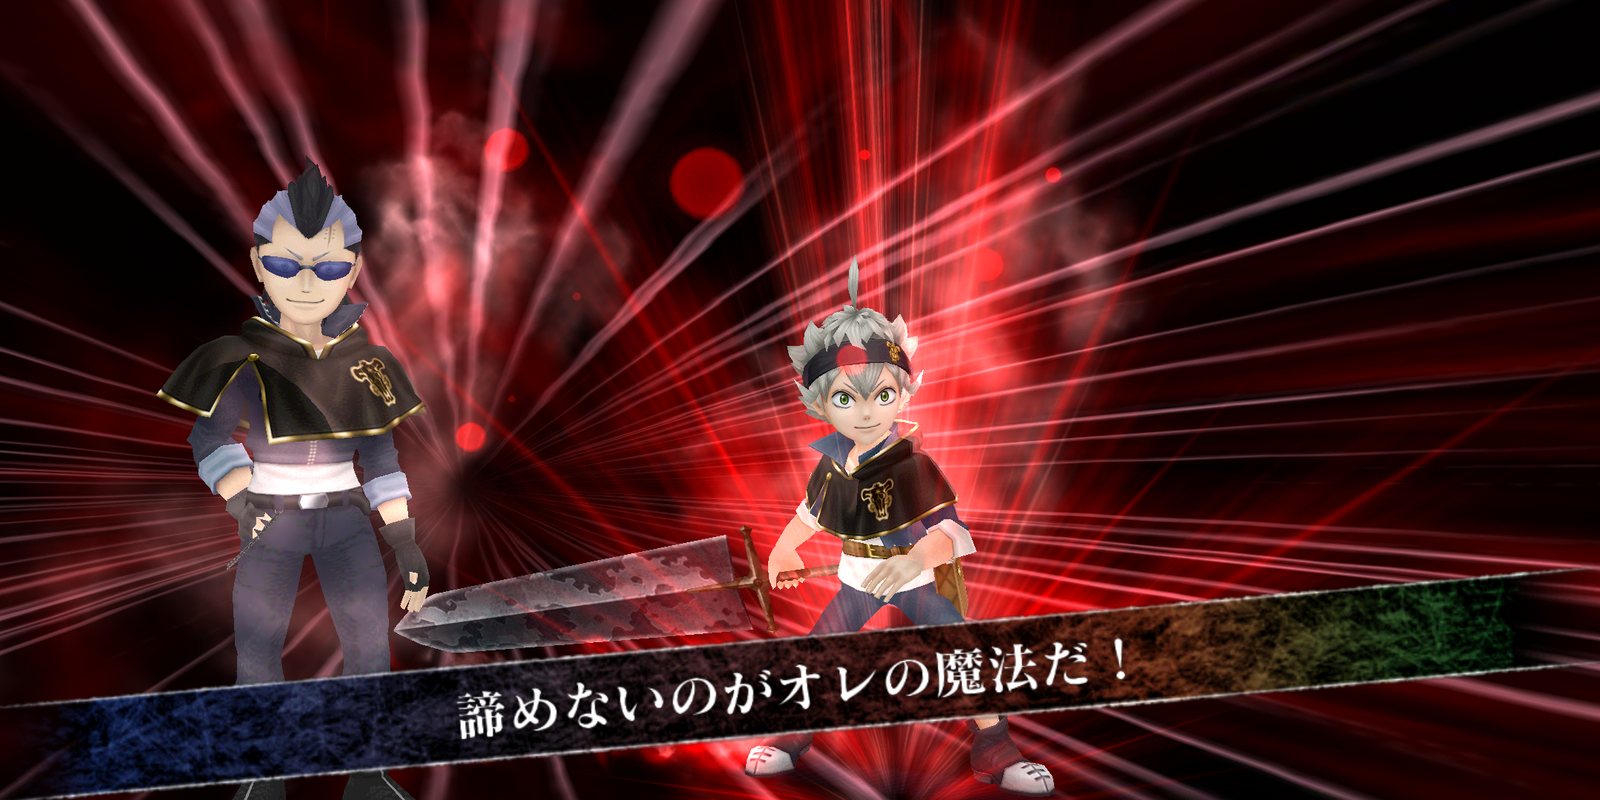 Black Clover: Infinite Knights (JP) 1.5.4 APK for Android Screenshot 5